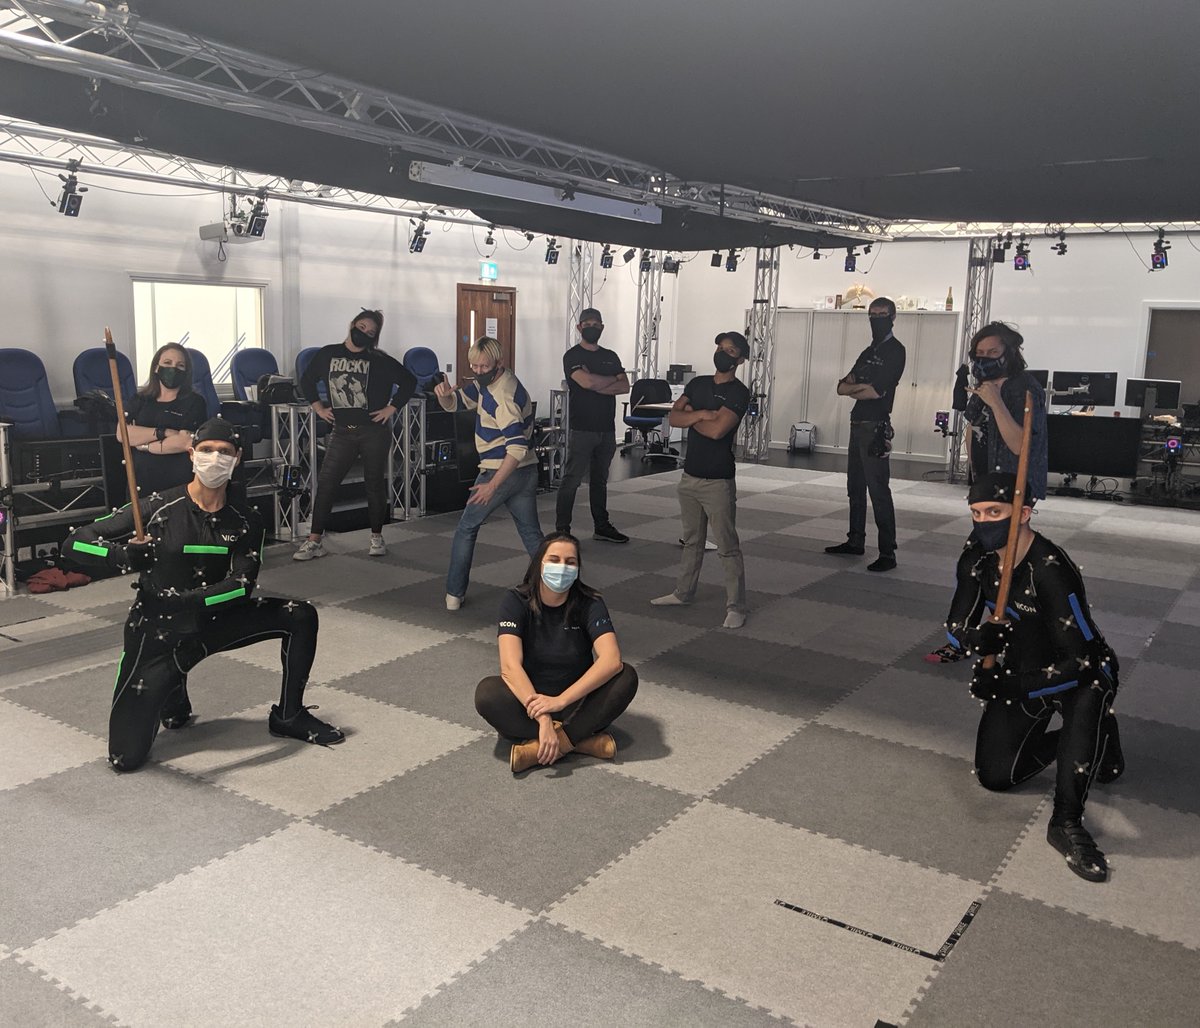 Here’s a sneak peek at something we've been shooting with our friends at @dimensionstudio. A week filled with stunts and sword fights from @lulasactor & #micaheltantrum, filmed by #kippertieltd #epicgames #unrealengine #realtime #digitalhumans #avatars #virtualproduction #mocap